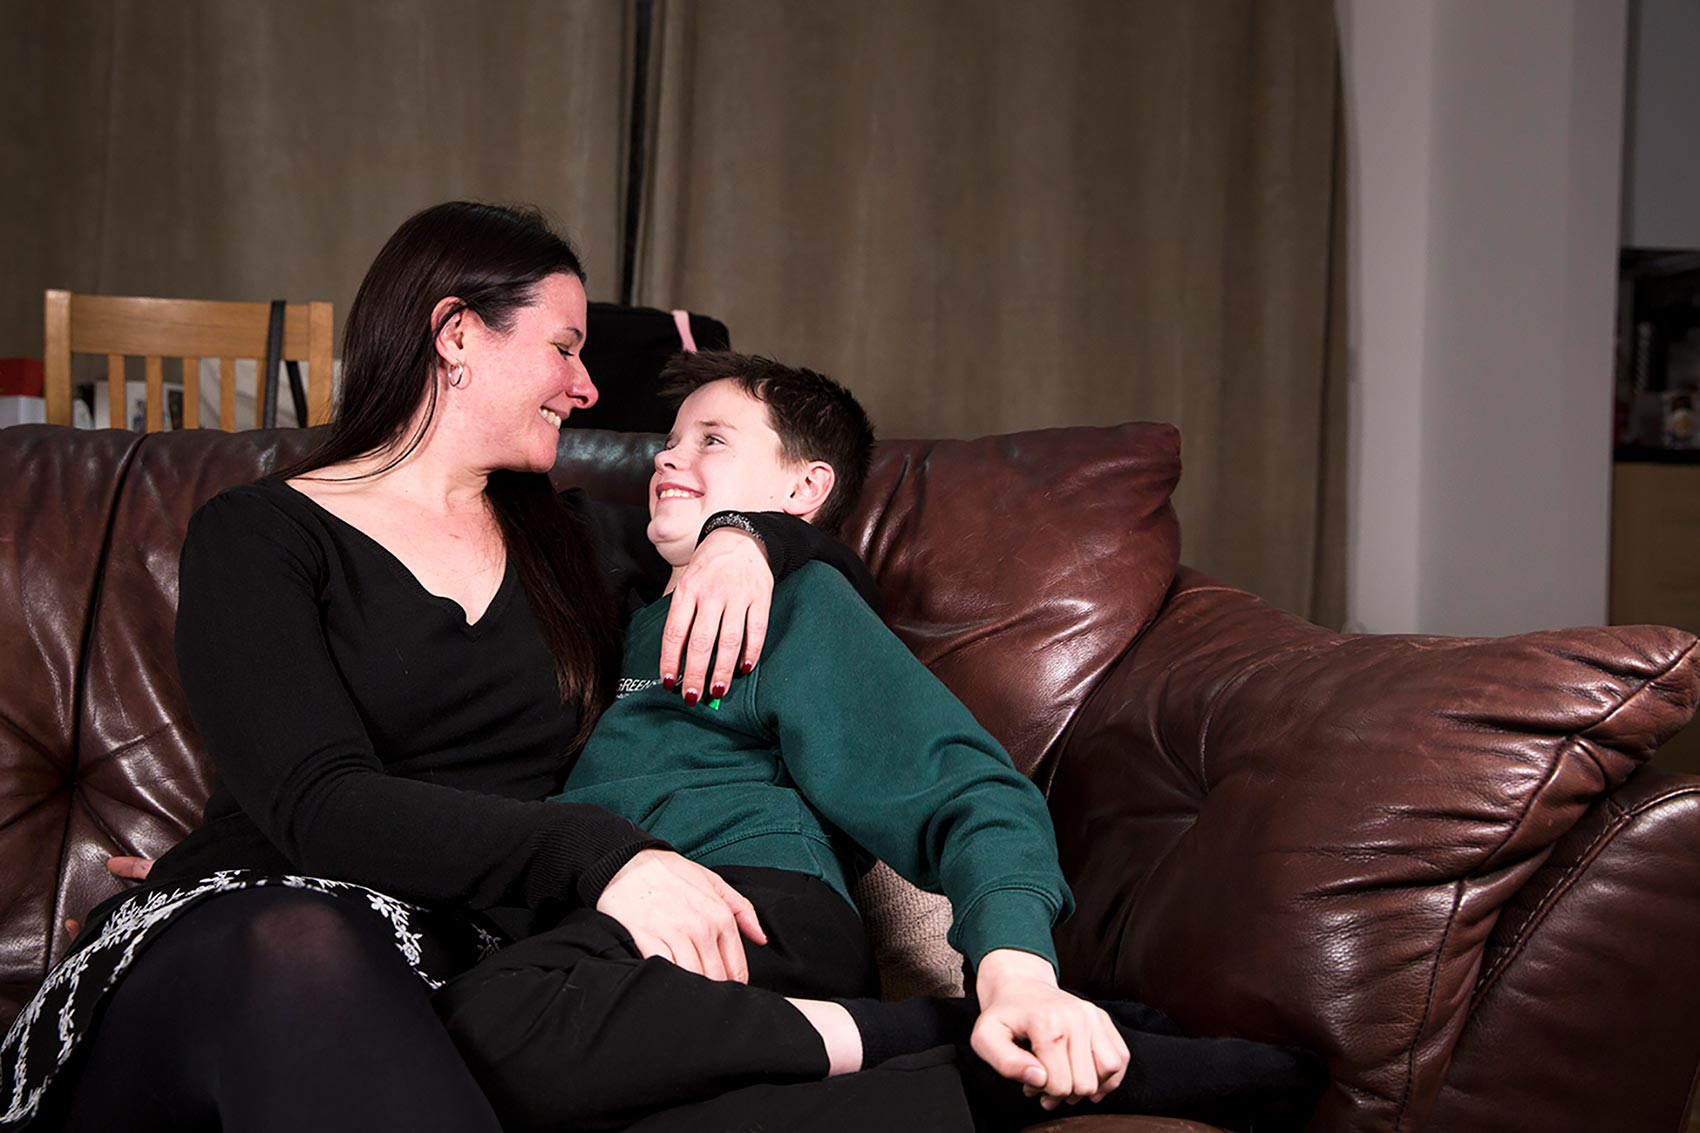 Lyndsay and her son in their new home Shelter case study shot by Alexandra Smart